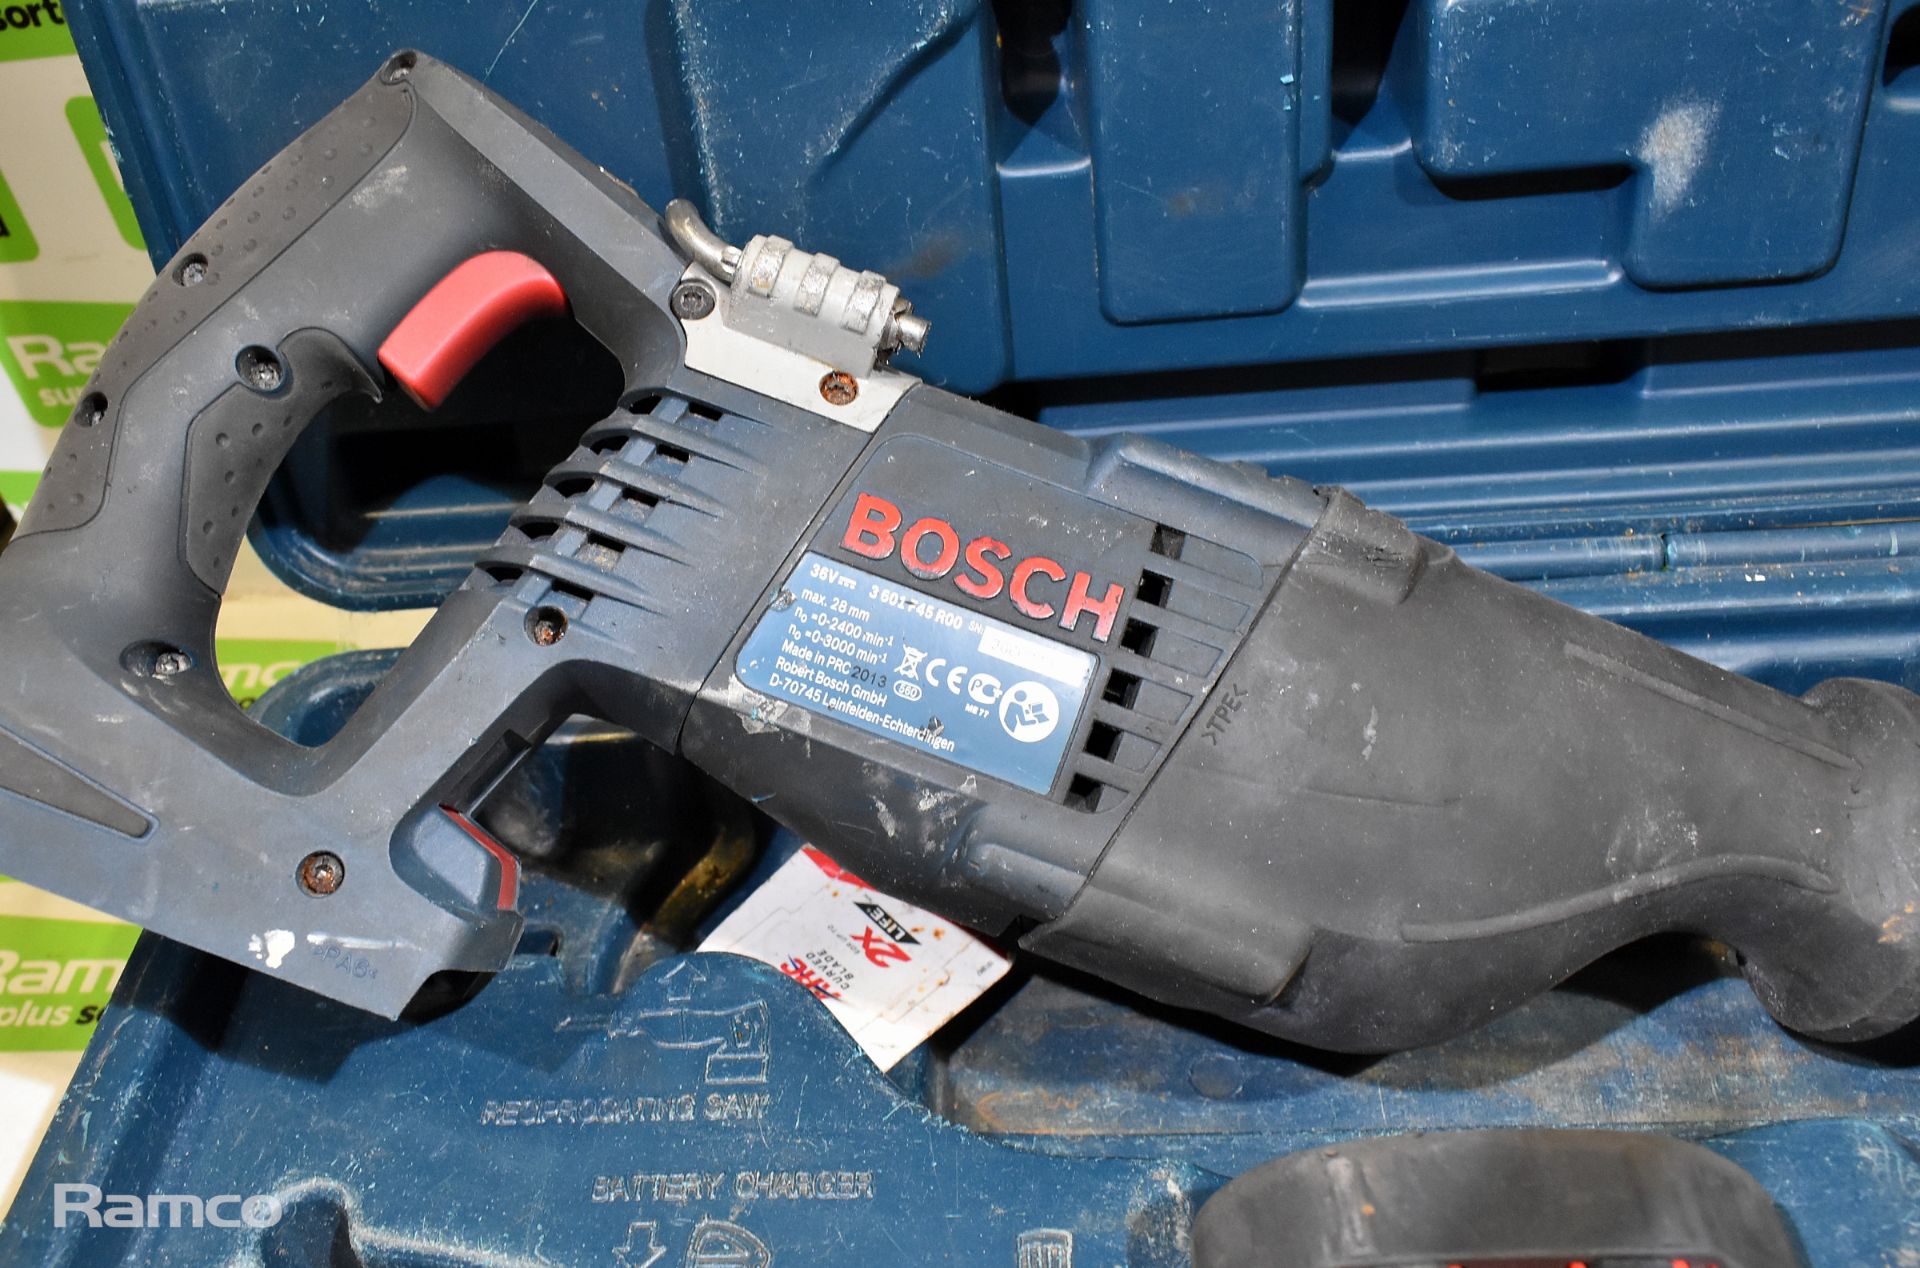 Bosch GSA 36 VLI cordless reciprocating saw - with blades and 2 batteries - Image 3 of 6